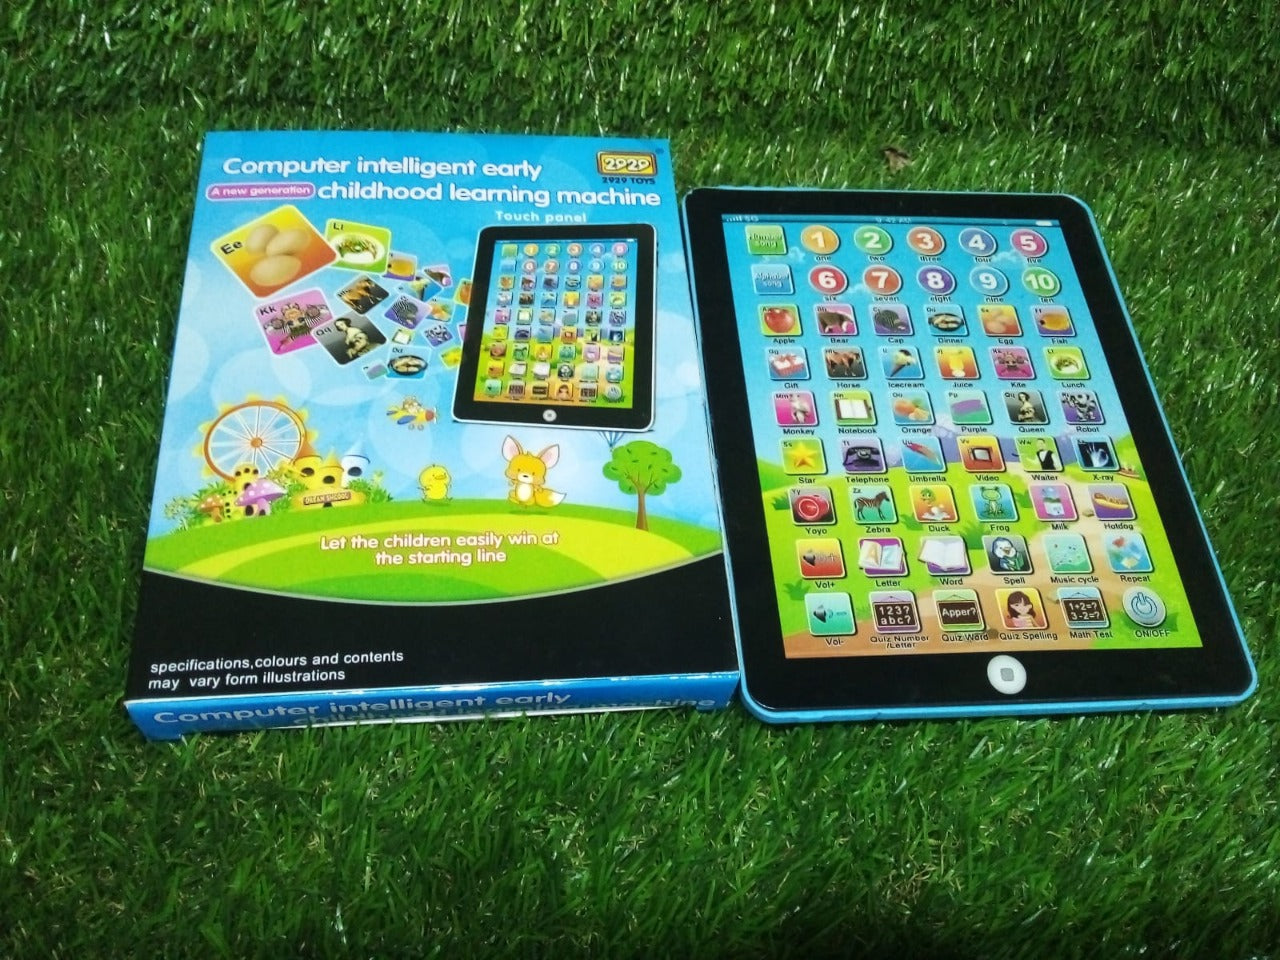 8086 Kids Learning Tablet Pad For Learning Purposes Of Kids And Childrens. DeoDap